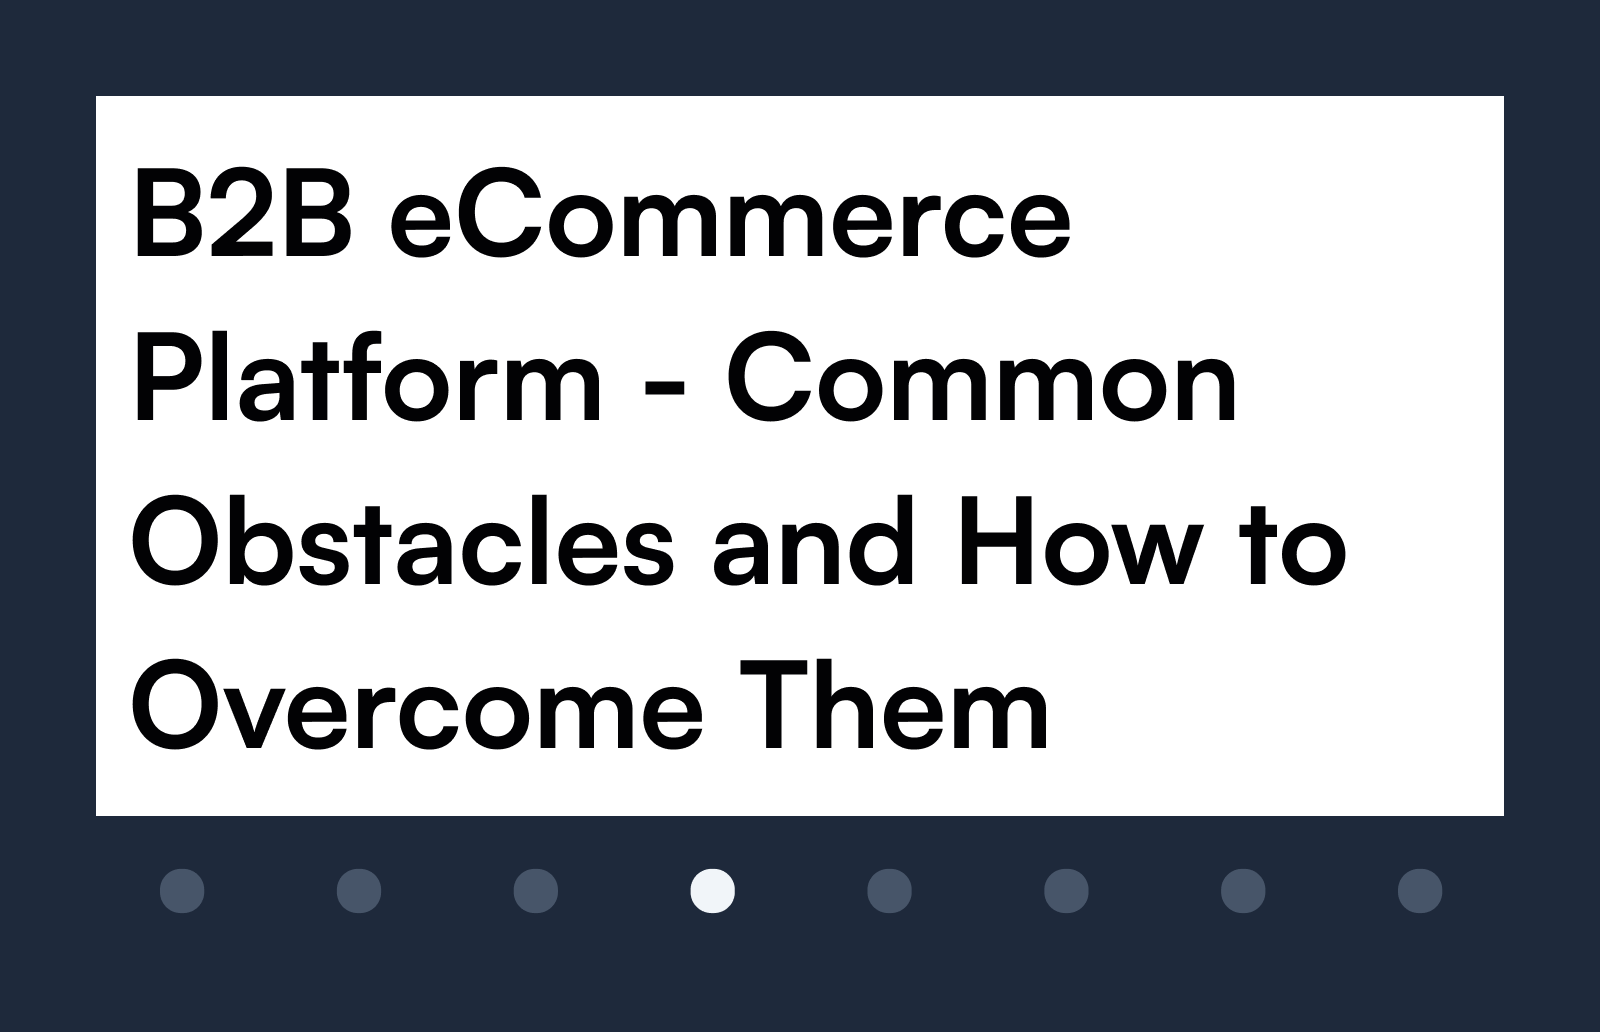 B2B ecommerce Platform – Common Obstacles and How to Overcome Them